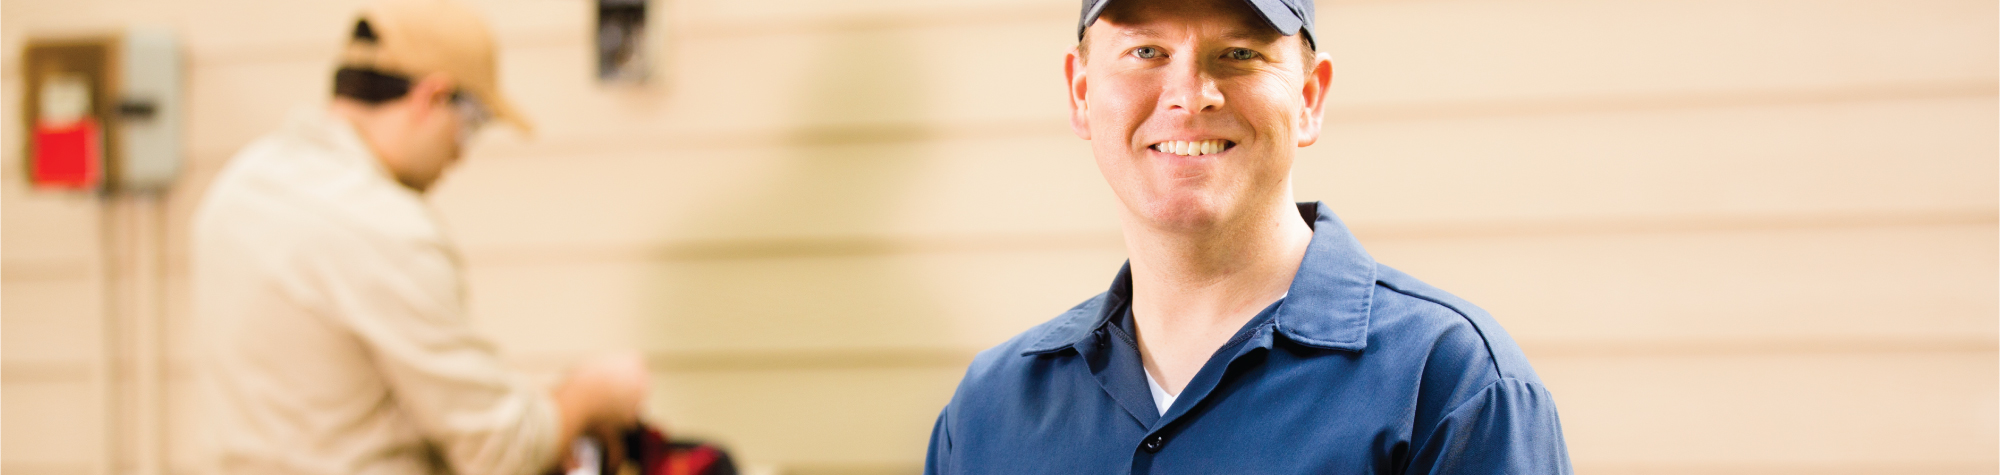 What Kind of Insurance Do HVAC Technicians Need?